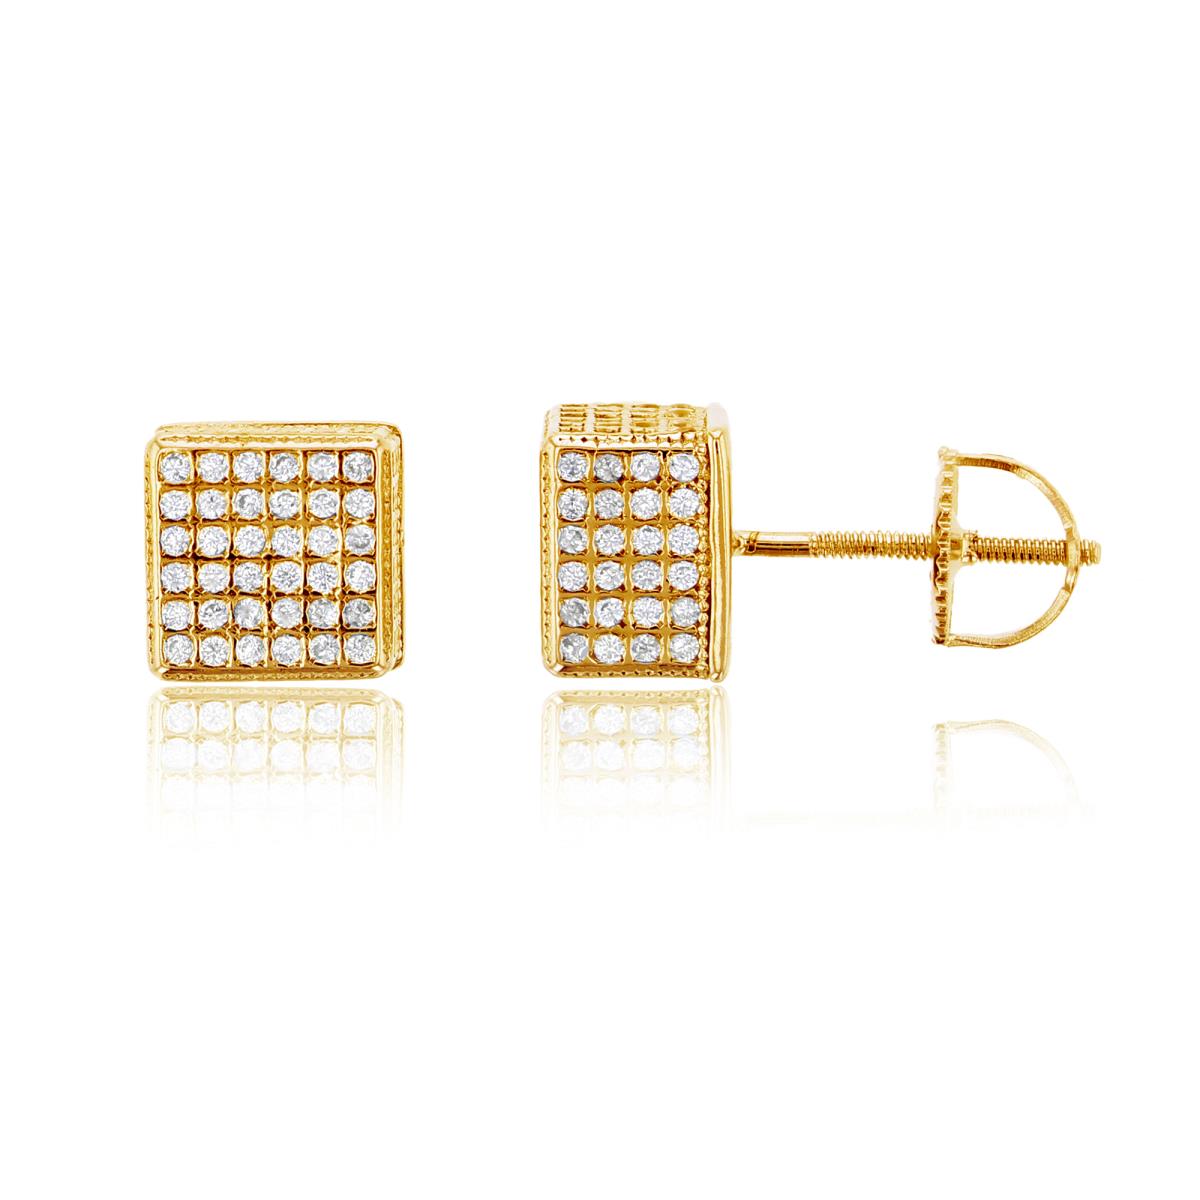 Sterling Silver Yellow7x7mm Micropave 3D Square Screwback Stud Earring